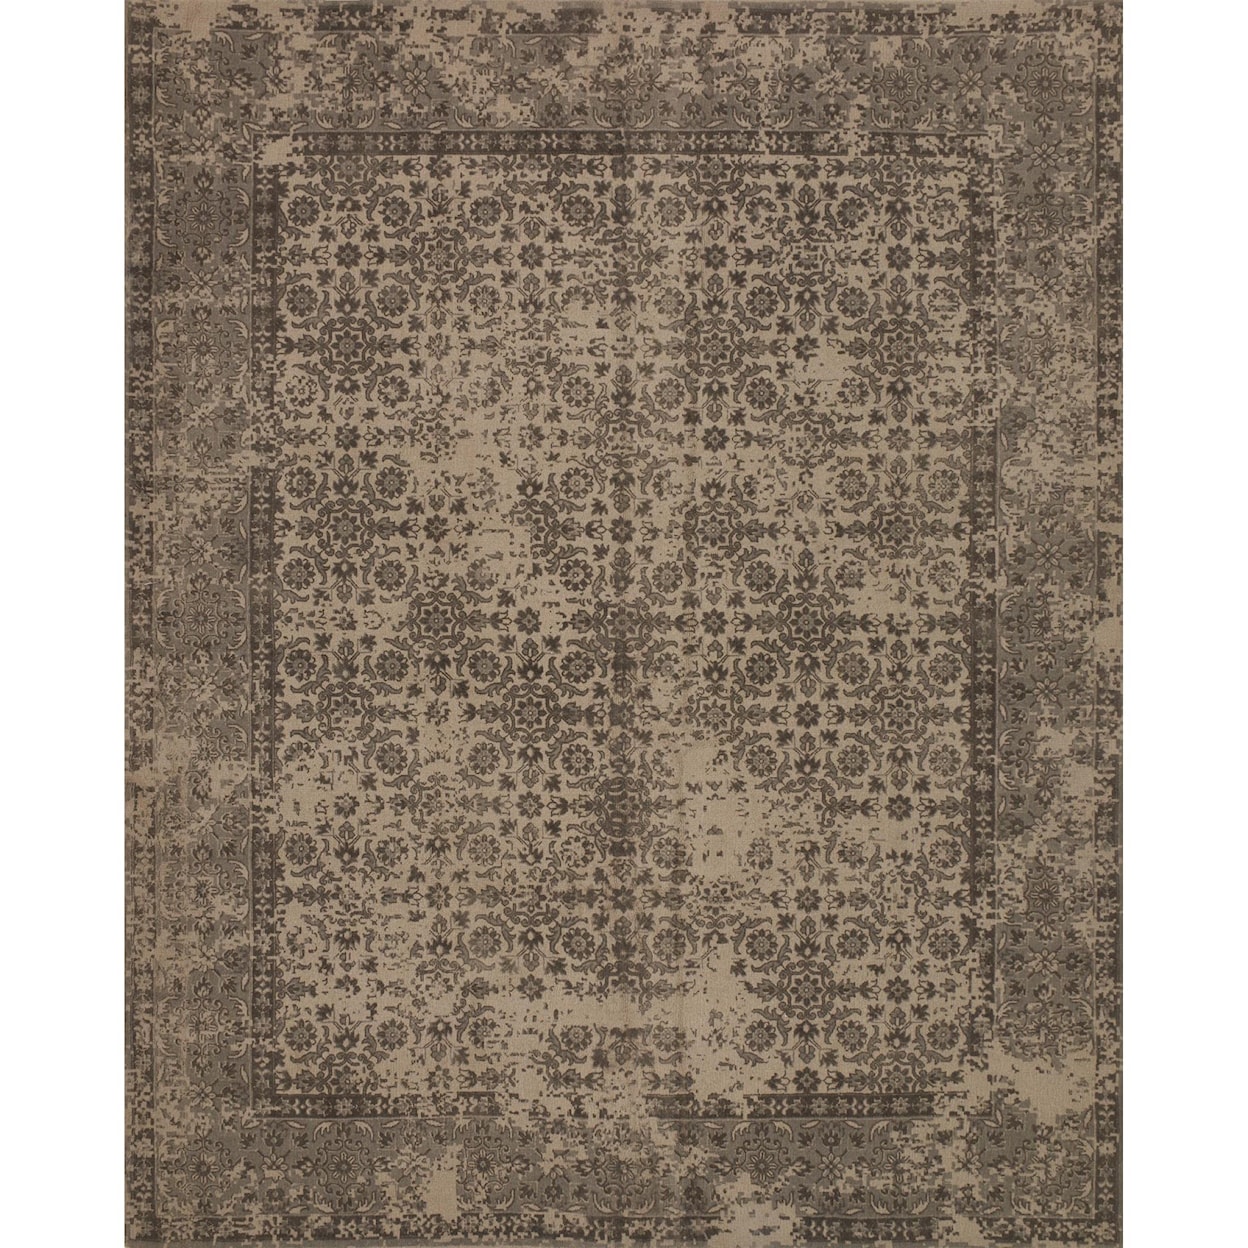 Magnolia Home by Joanna Gaines for Loloi Lily Park 5' 0" x 7' 6" Rectangle Rug